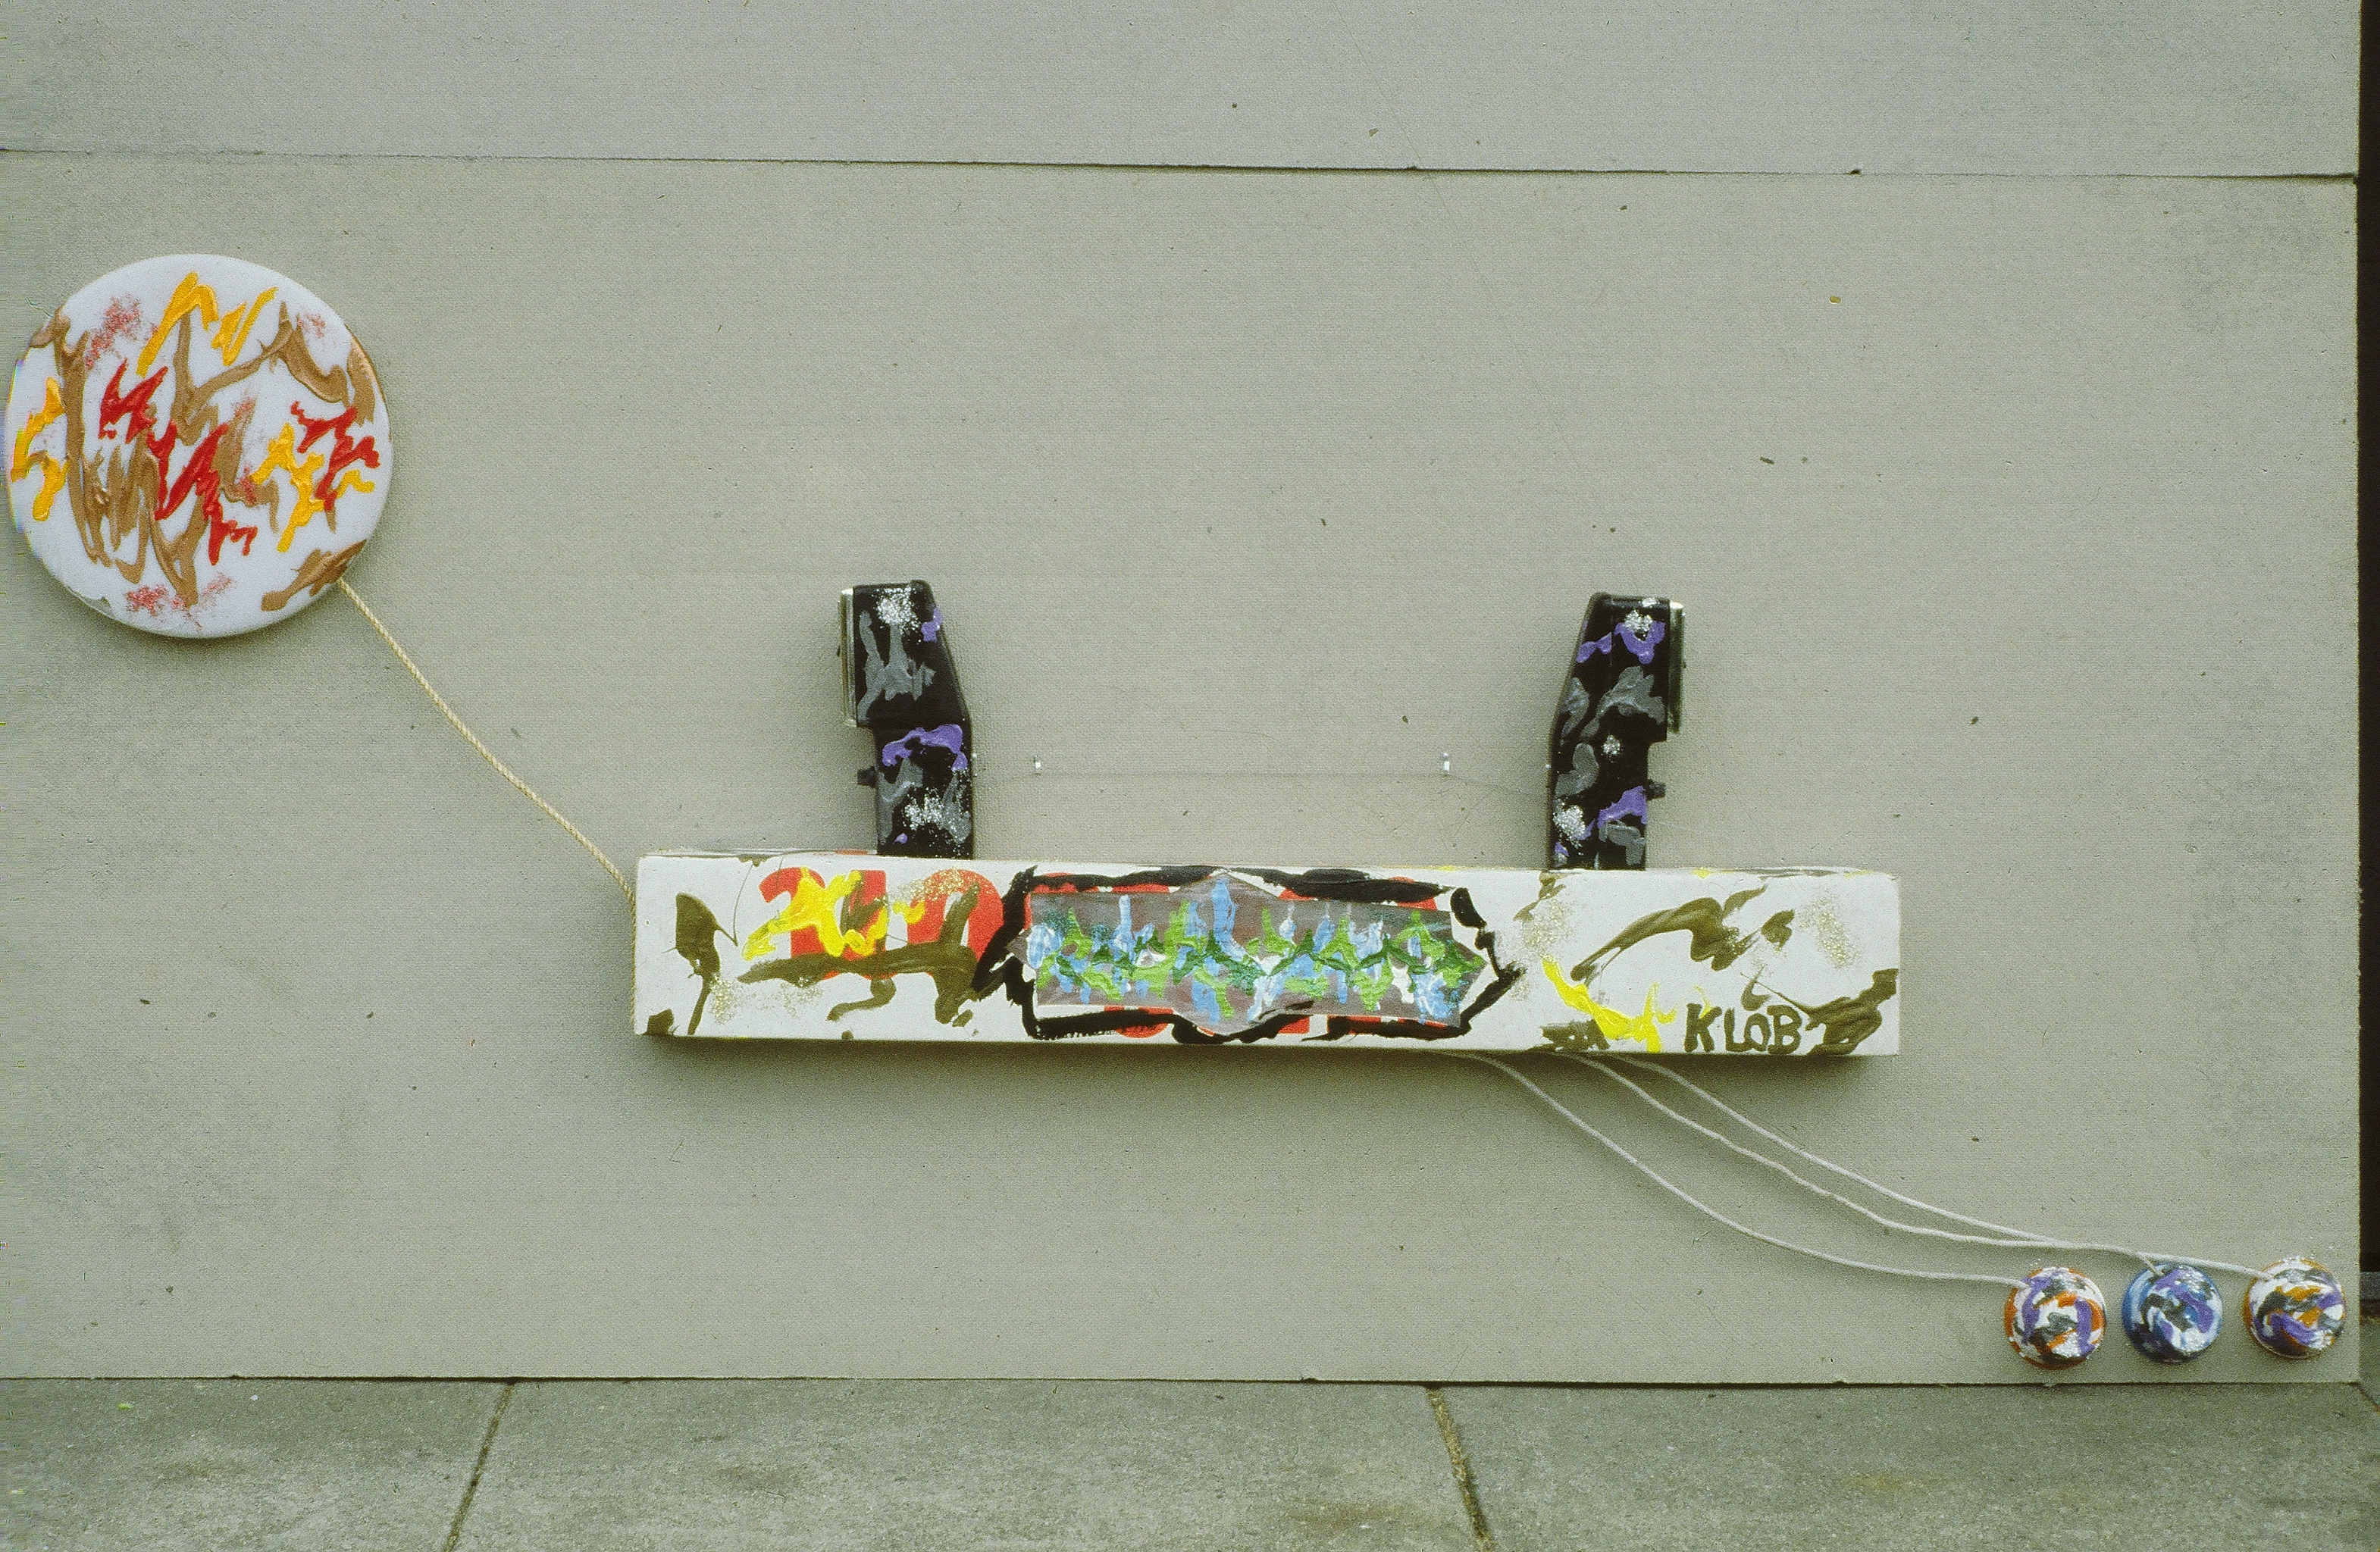 1979; acrylic, rope, cardboard box, plastic containers, car parts, light parts; 4 ft 4 in X 10 ft